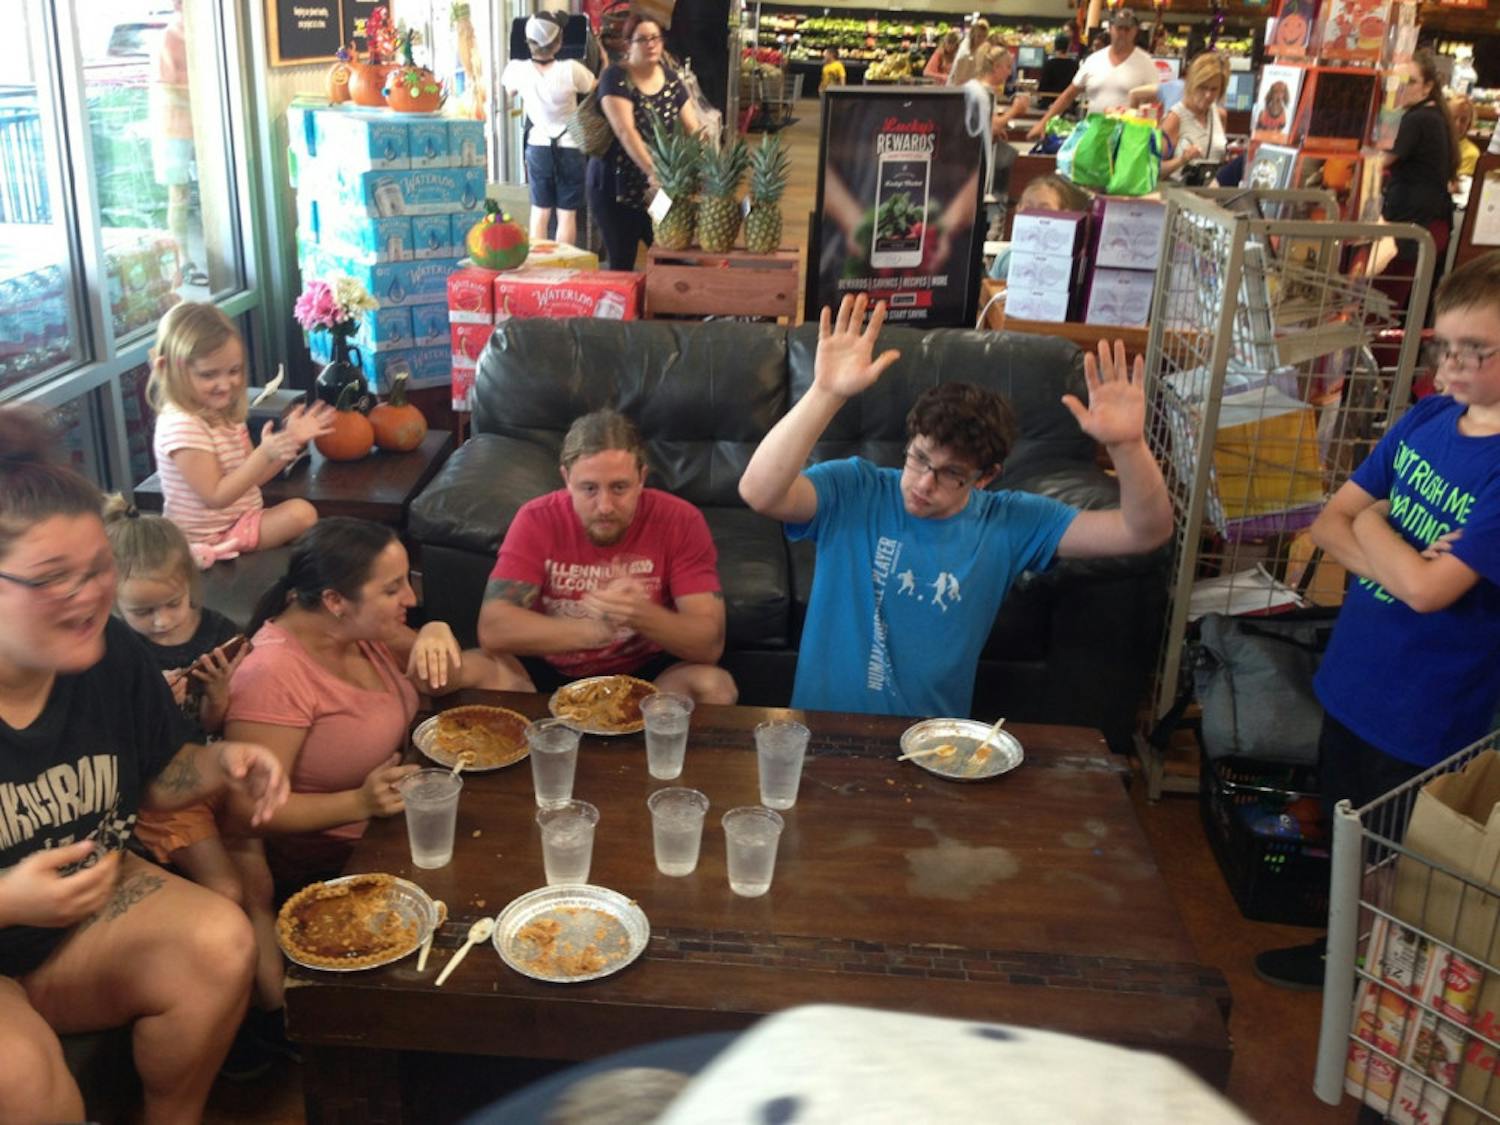 Steven Edvalson raises his hands in victory after finishing his pumpkin pie on Sunday at Lucky’s Market. Edvalson ate his pie in fewer than seven minutes during a pie-eating contest at the grocery store.